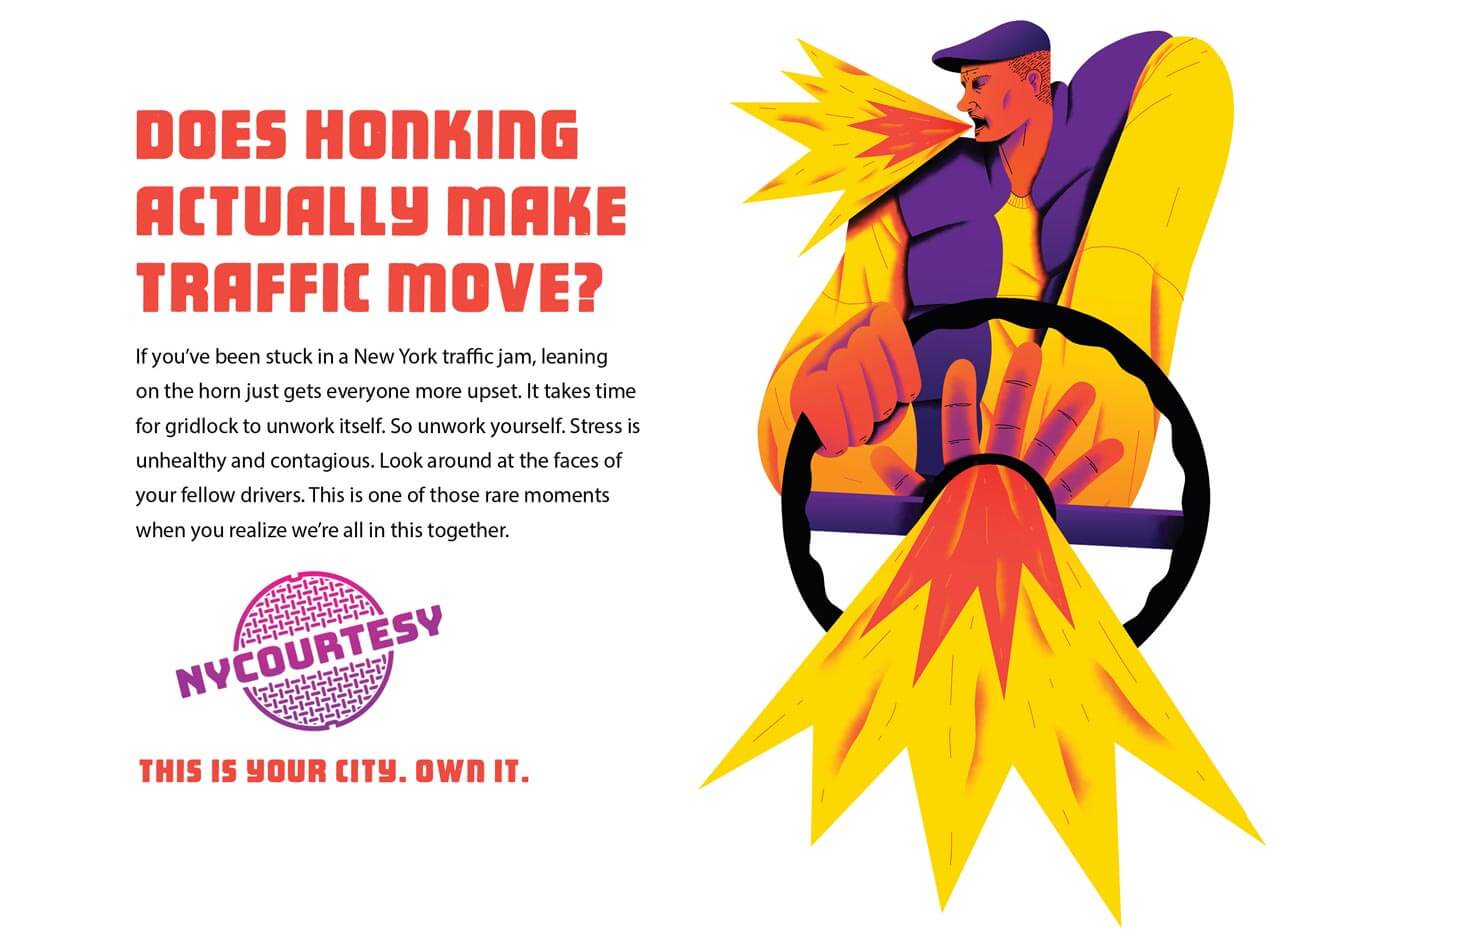 New York Courtesy. Does honking actually make traffic move?